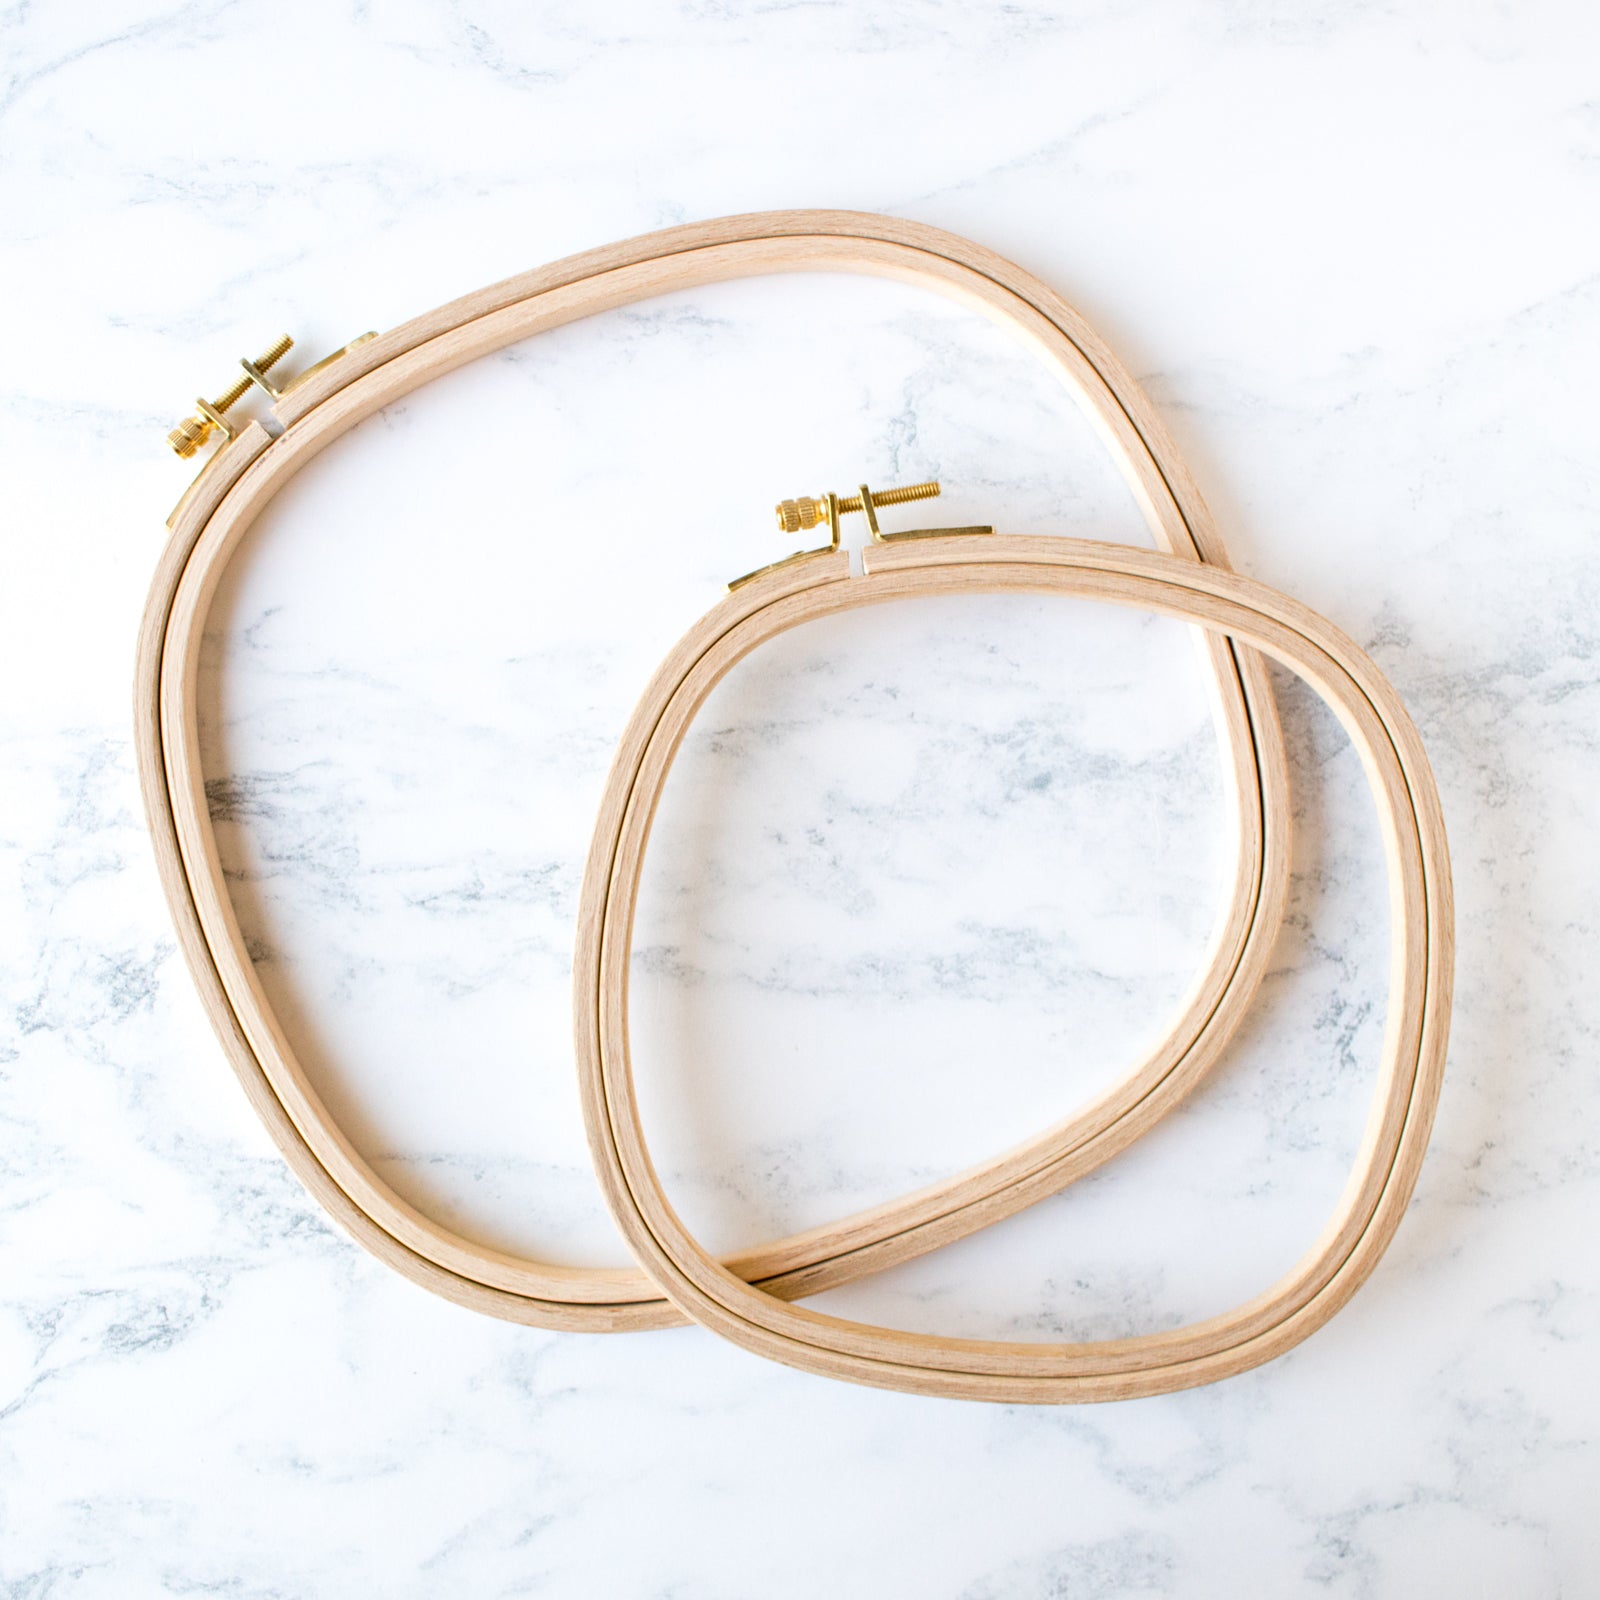 Premium Hard Wood Embroidery Hoops - Square - Stitched Modern